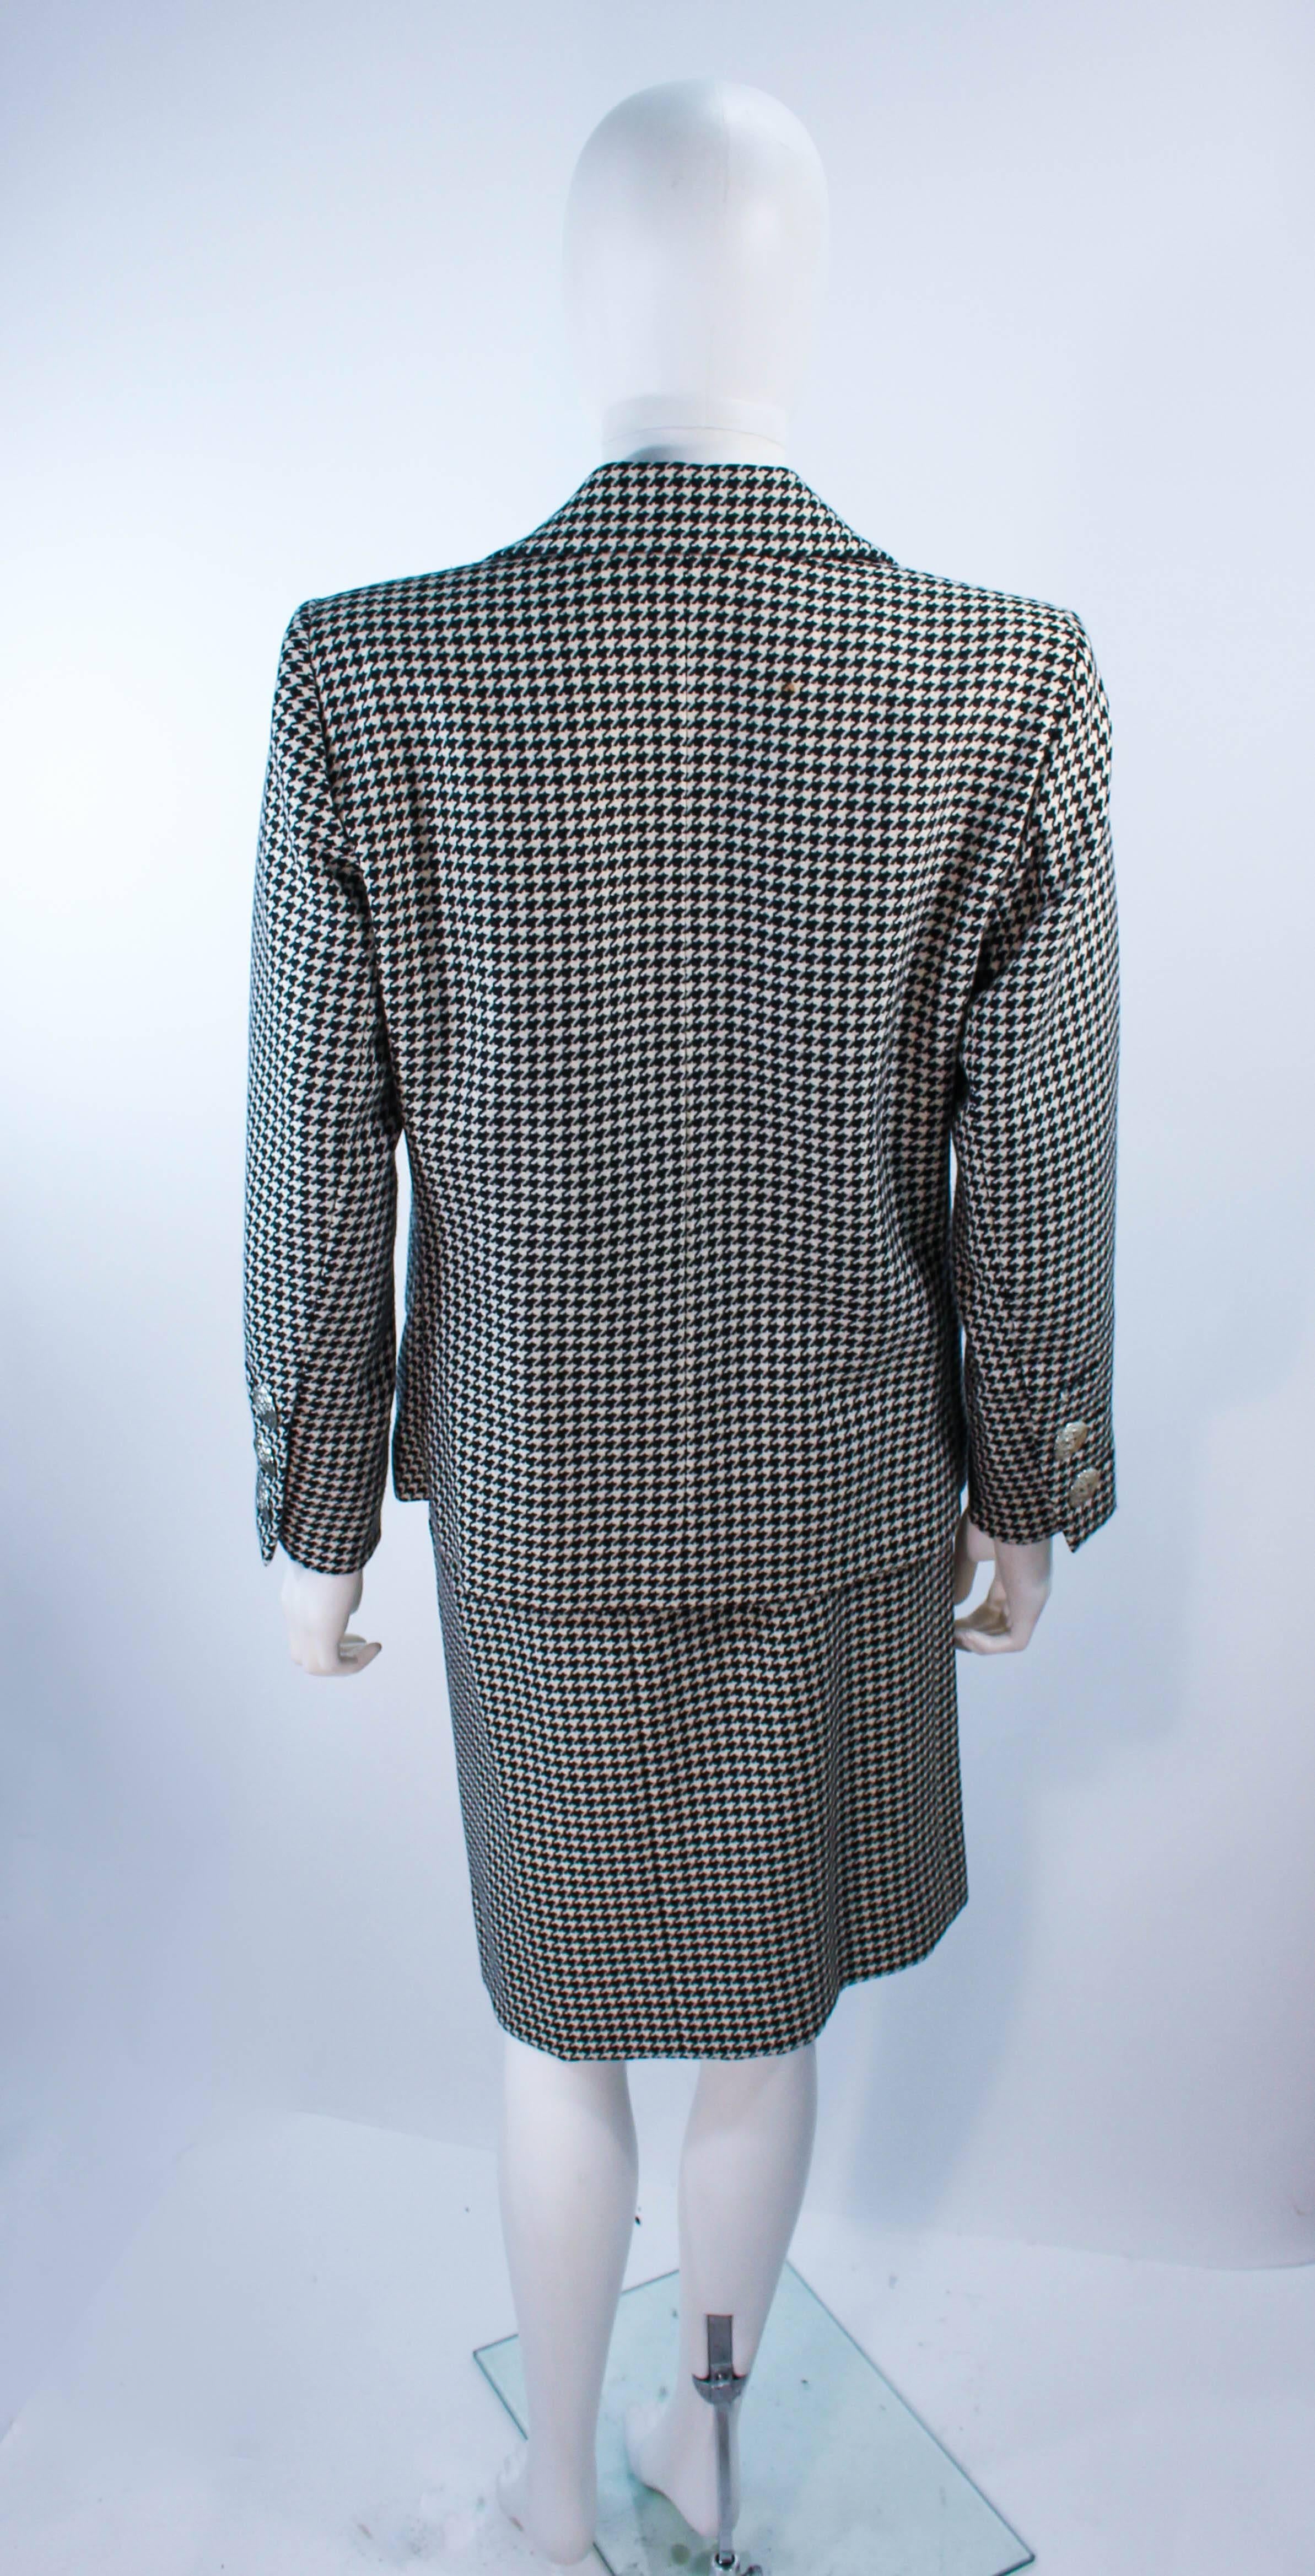 YVES SAINT LAURENT Black and White Houndstooth Skirt Suit Size 8 10 For Sale 2